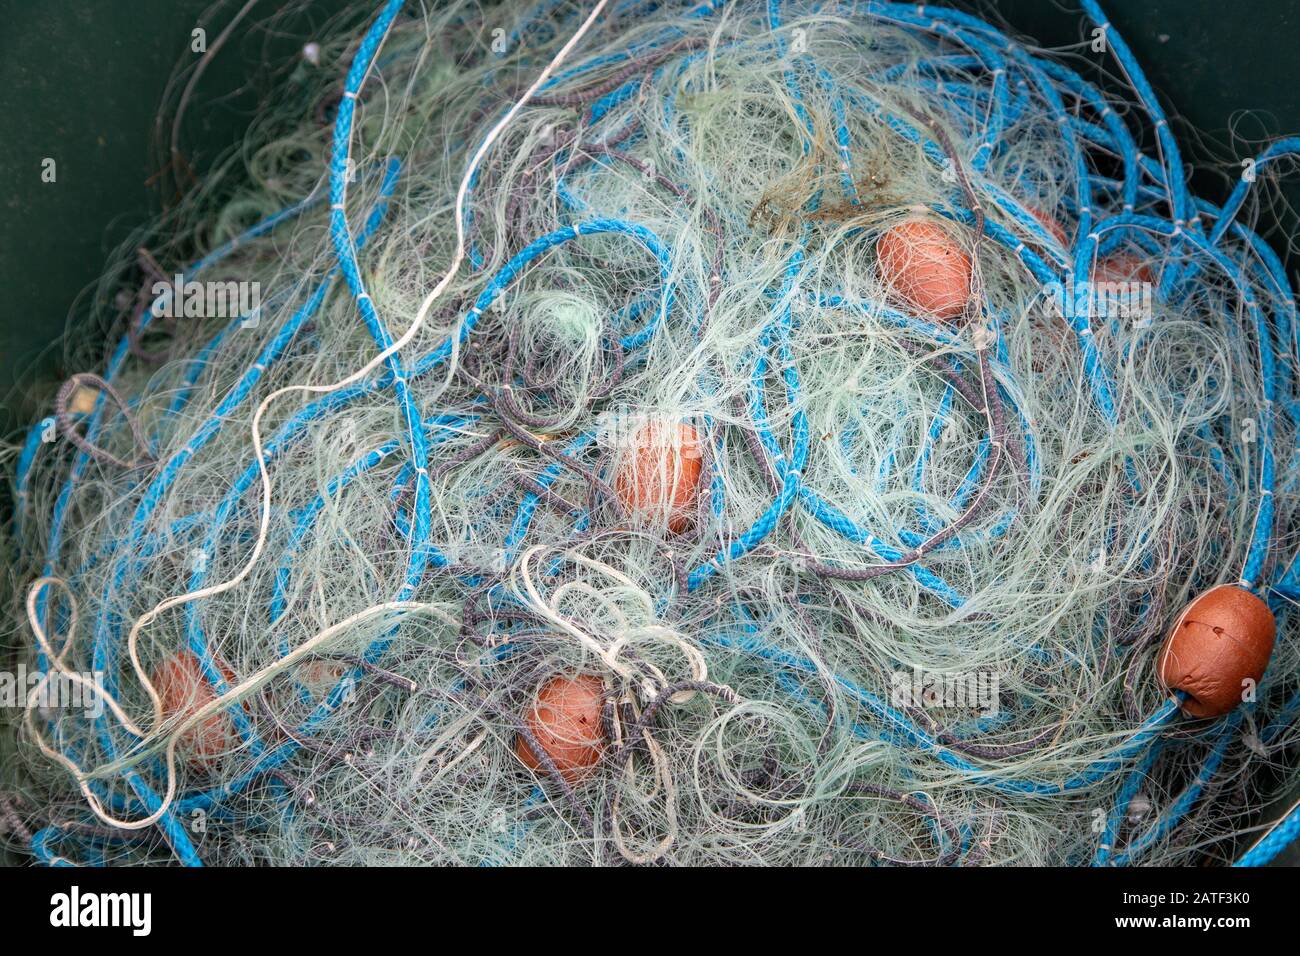 Commercial fishing nets cork floats hi-res stock photography and